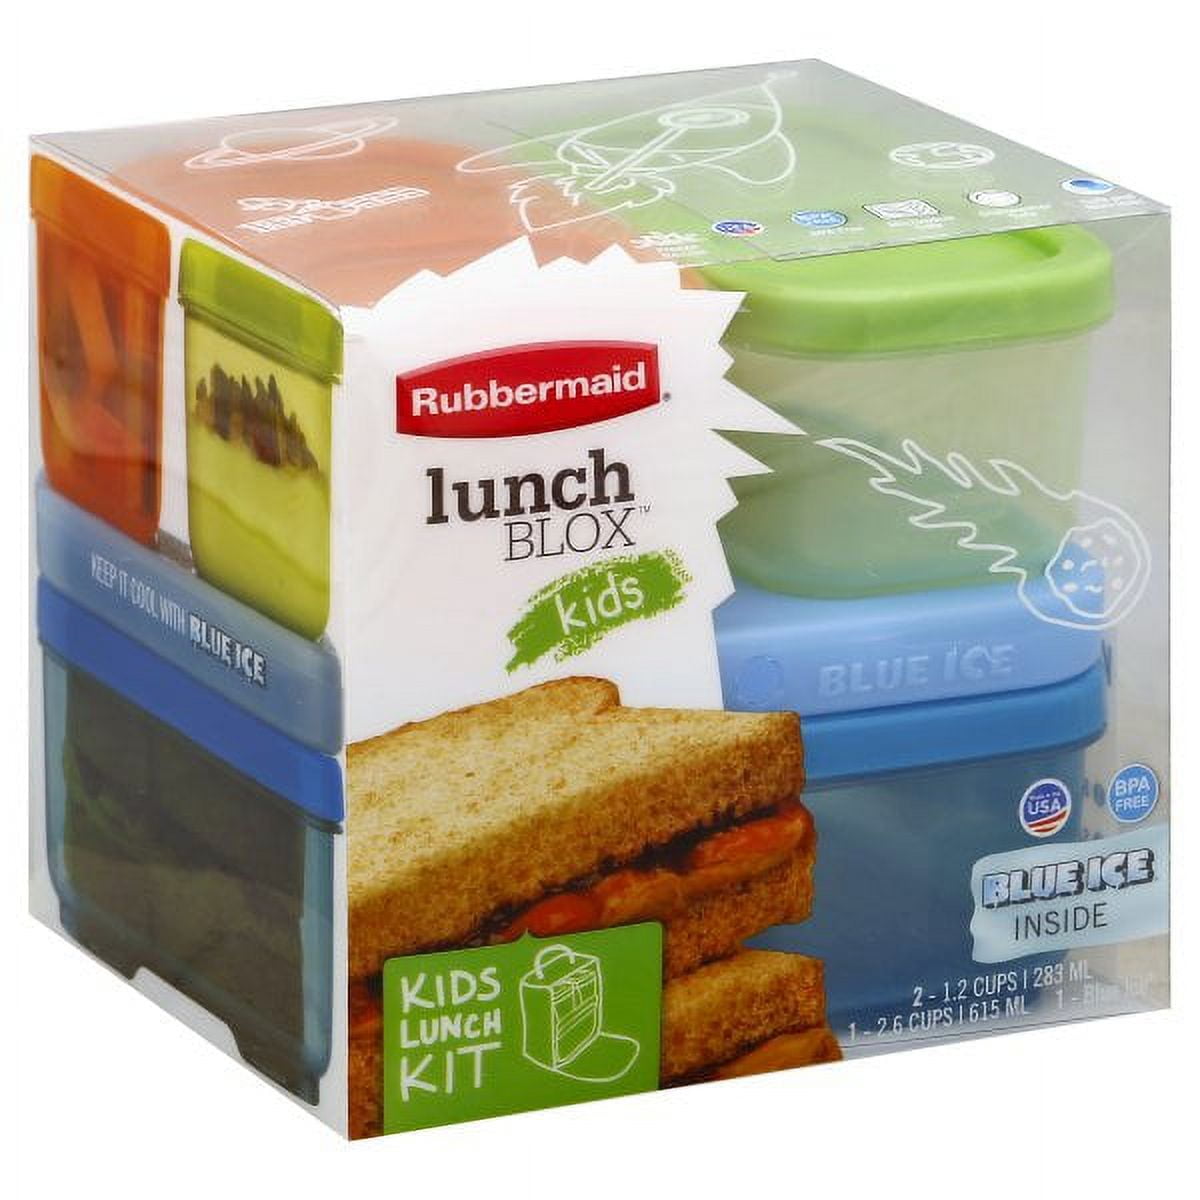 Lunch Time Made Simple With Rubbermaid LunchBlox Kits #IC #BloxOff